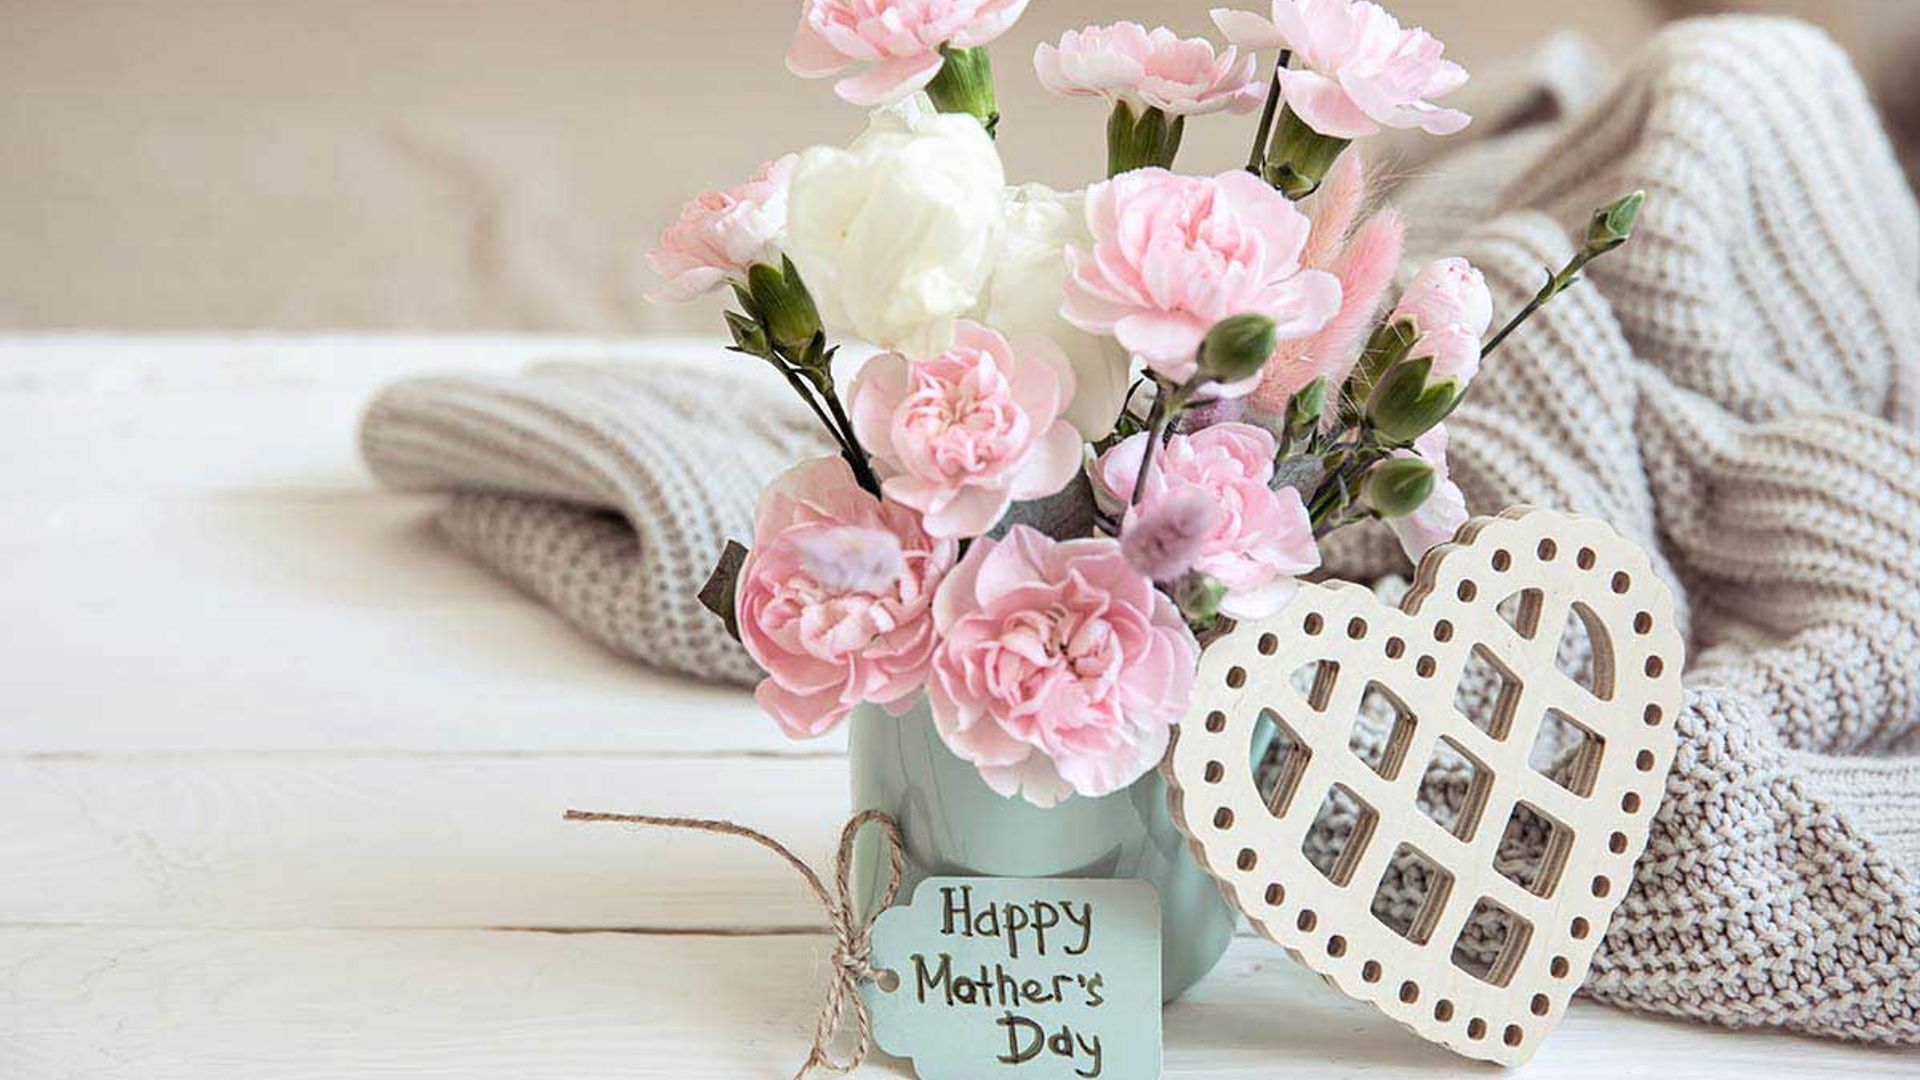 10 sweet Mother's Day decorations for your at-home celebration - from flowers to balloons and banners